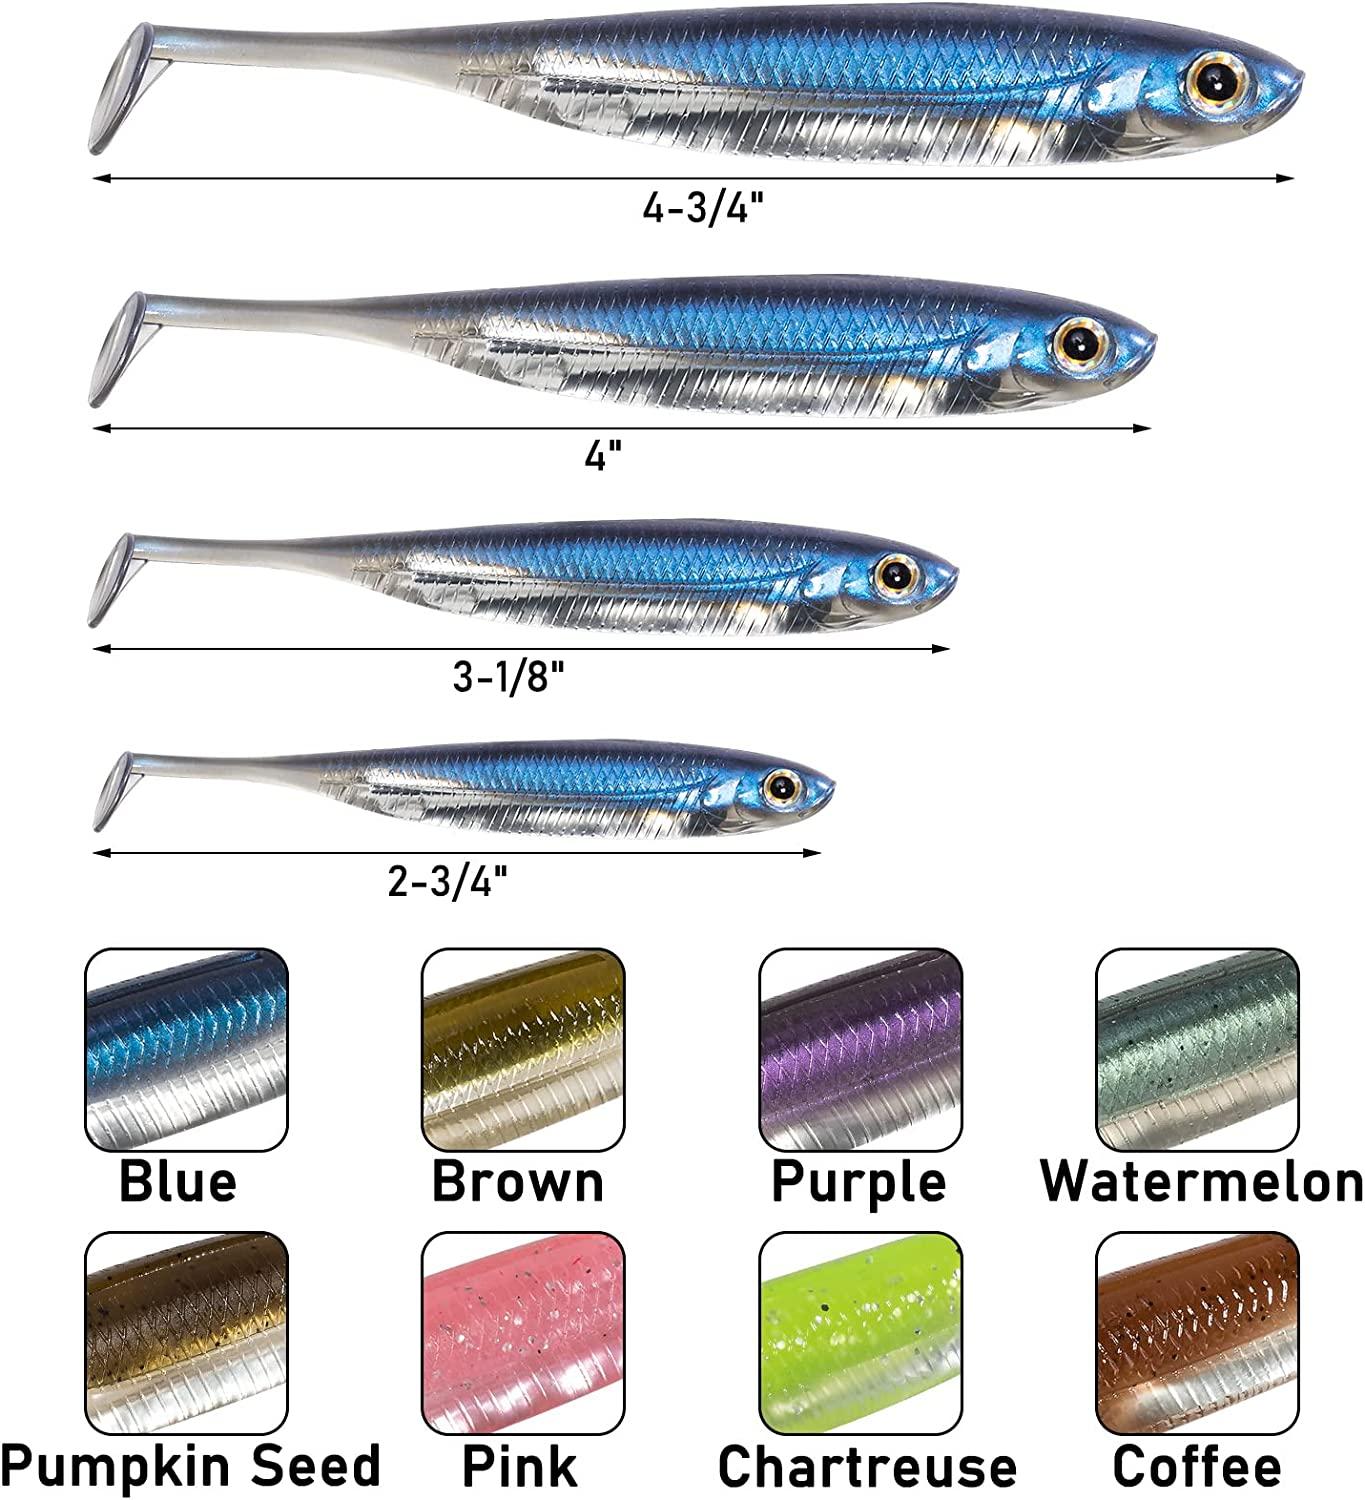 Matrix Shad Original 3 Inch Fishing Lure for Speckled Trout, Redfish, Bass  - Paddle Tail Swimbaits for Freshwater and Saltwater - Green Hornet - 8